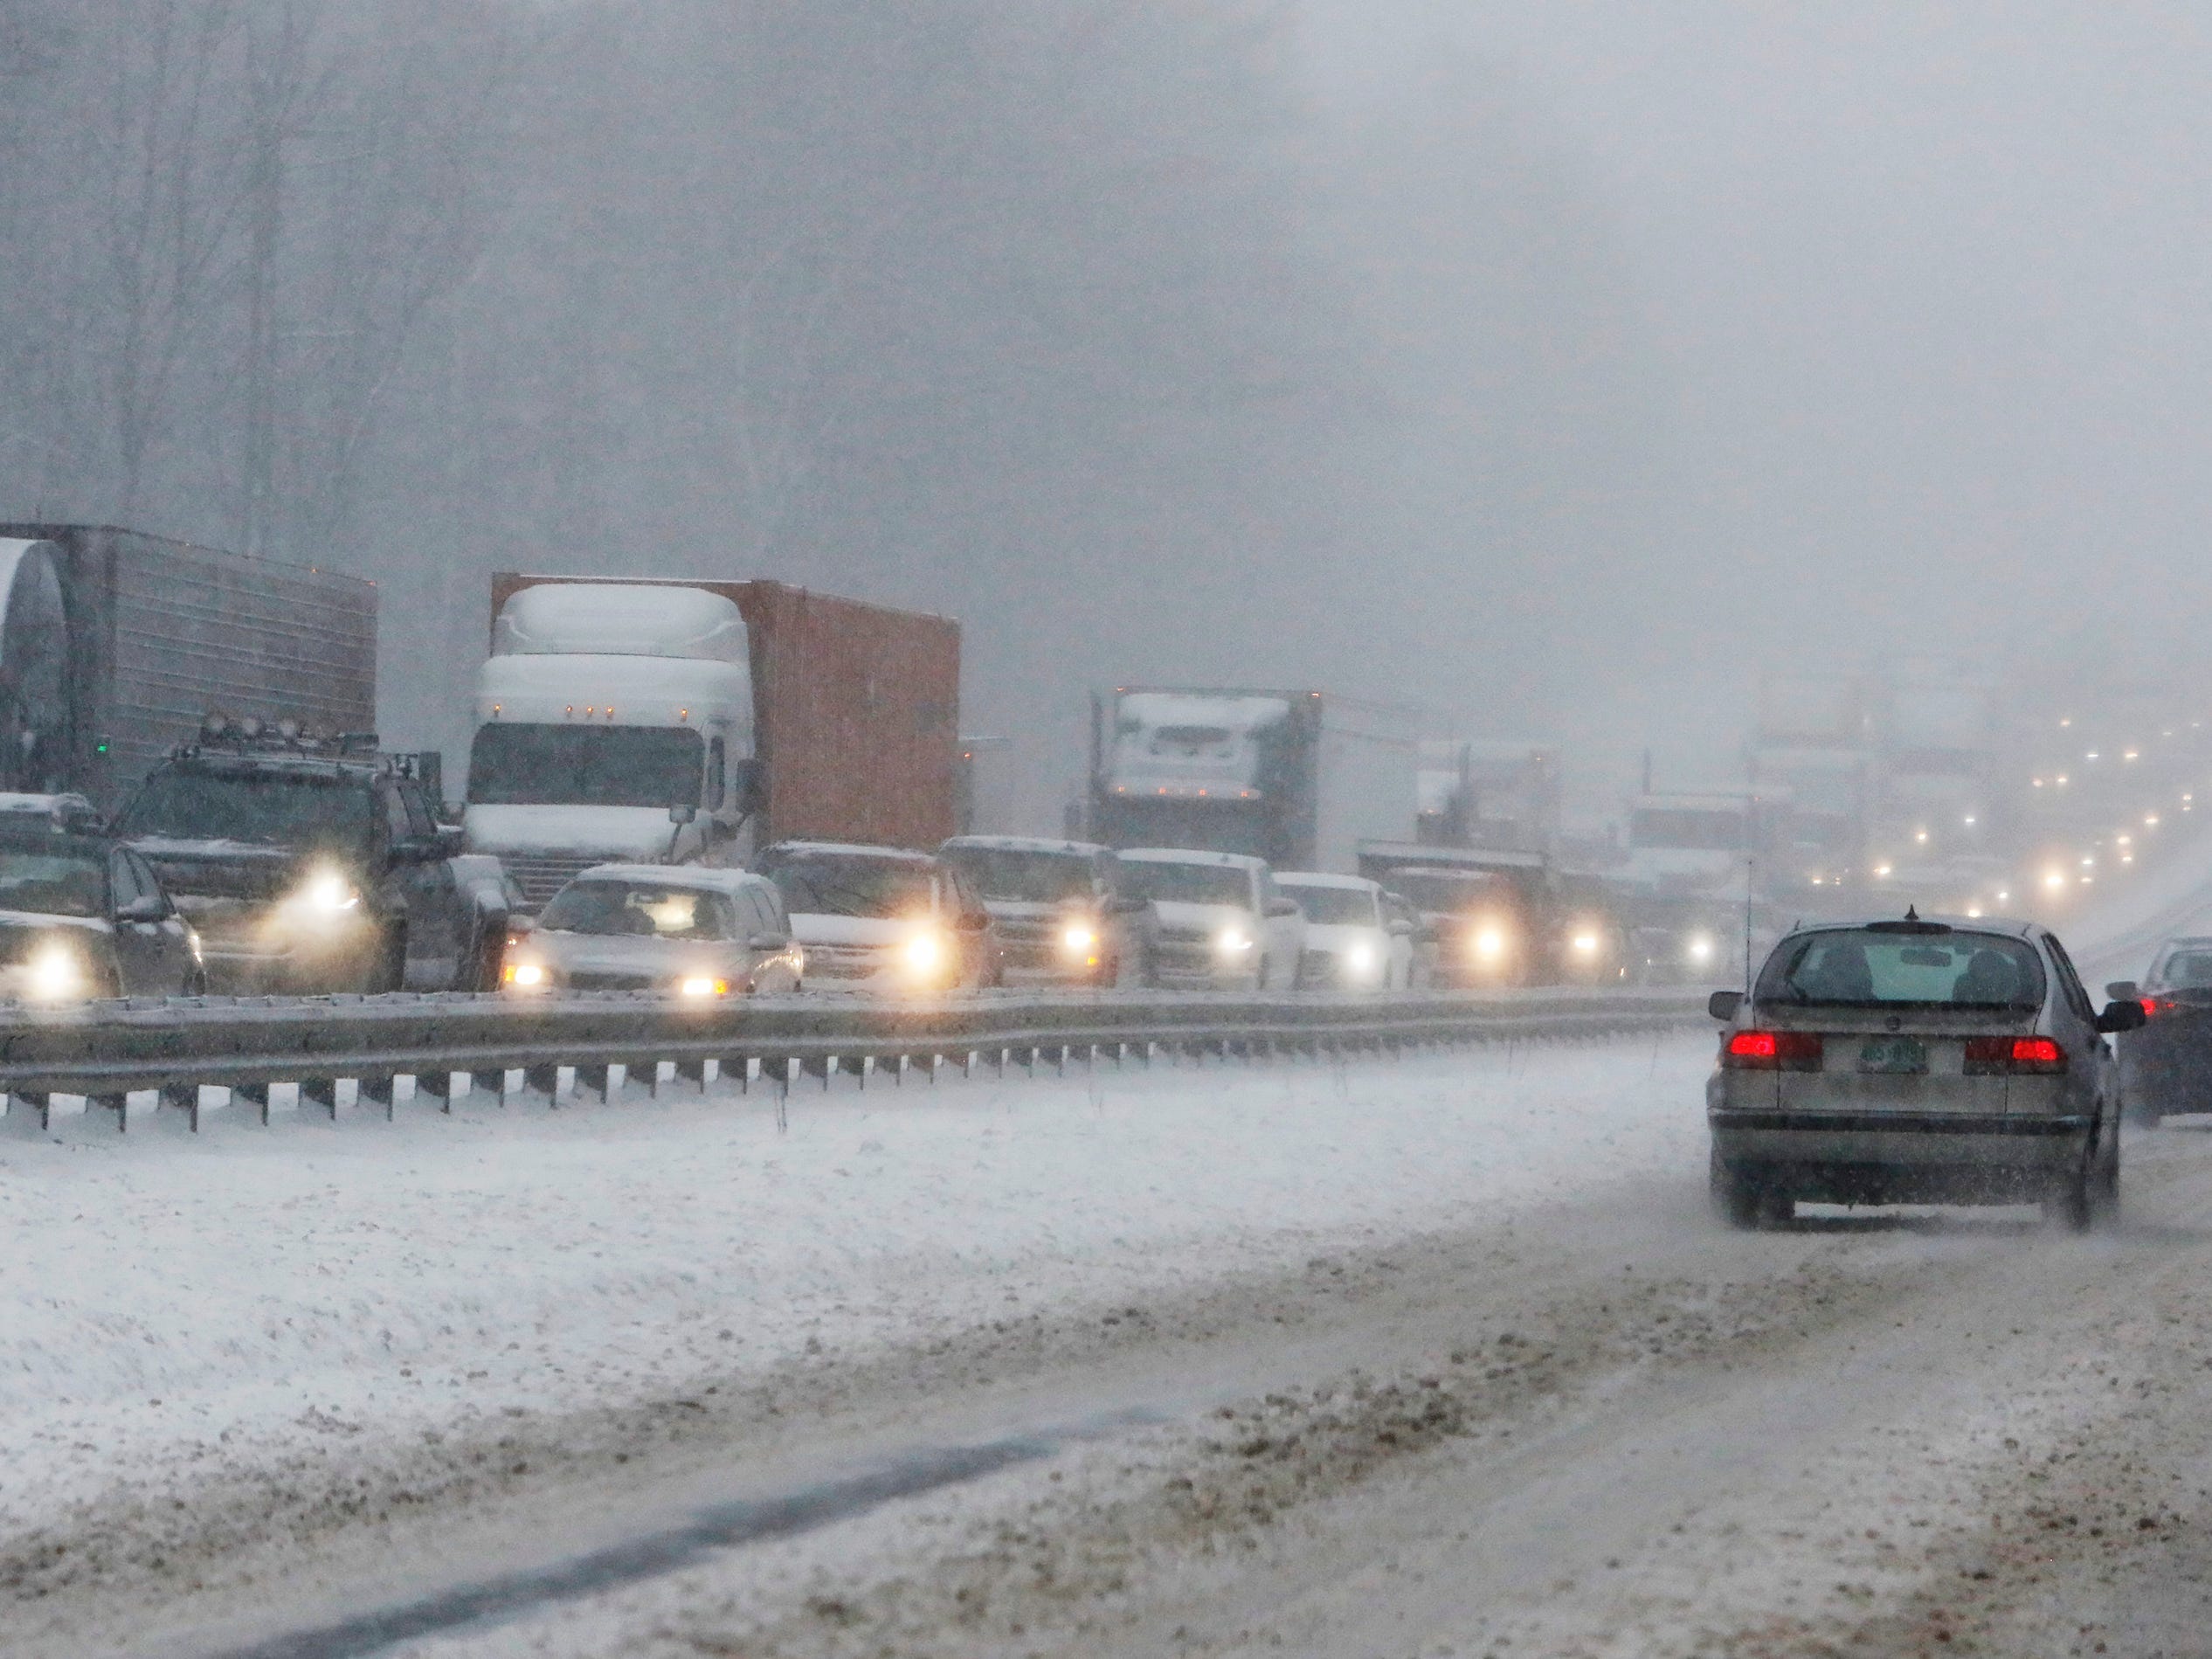 Northbound traffic on I-95 is at a standstill following a tractor trailer that jack-knived in the snowstorm.